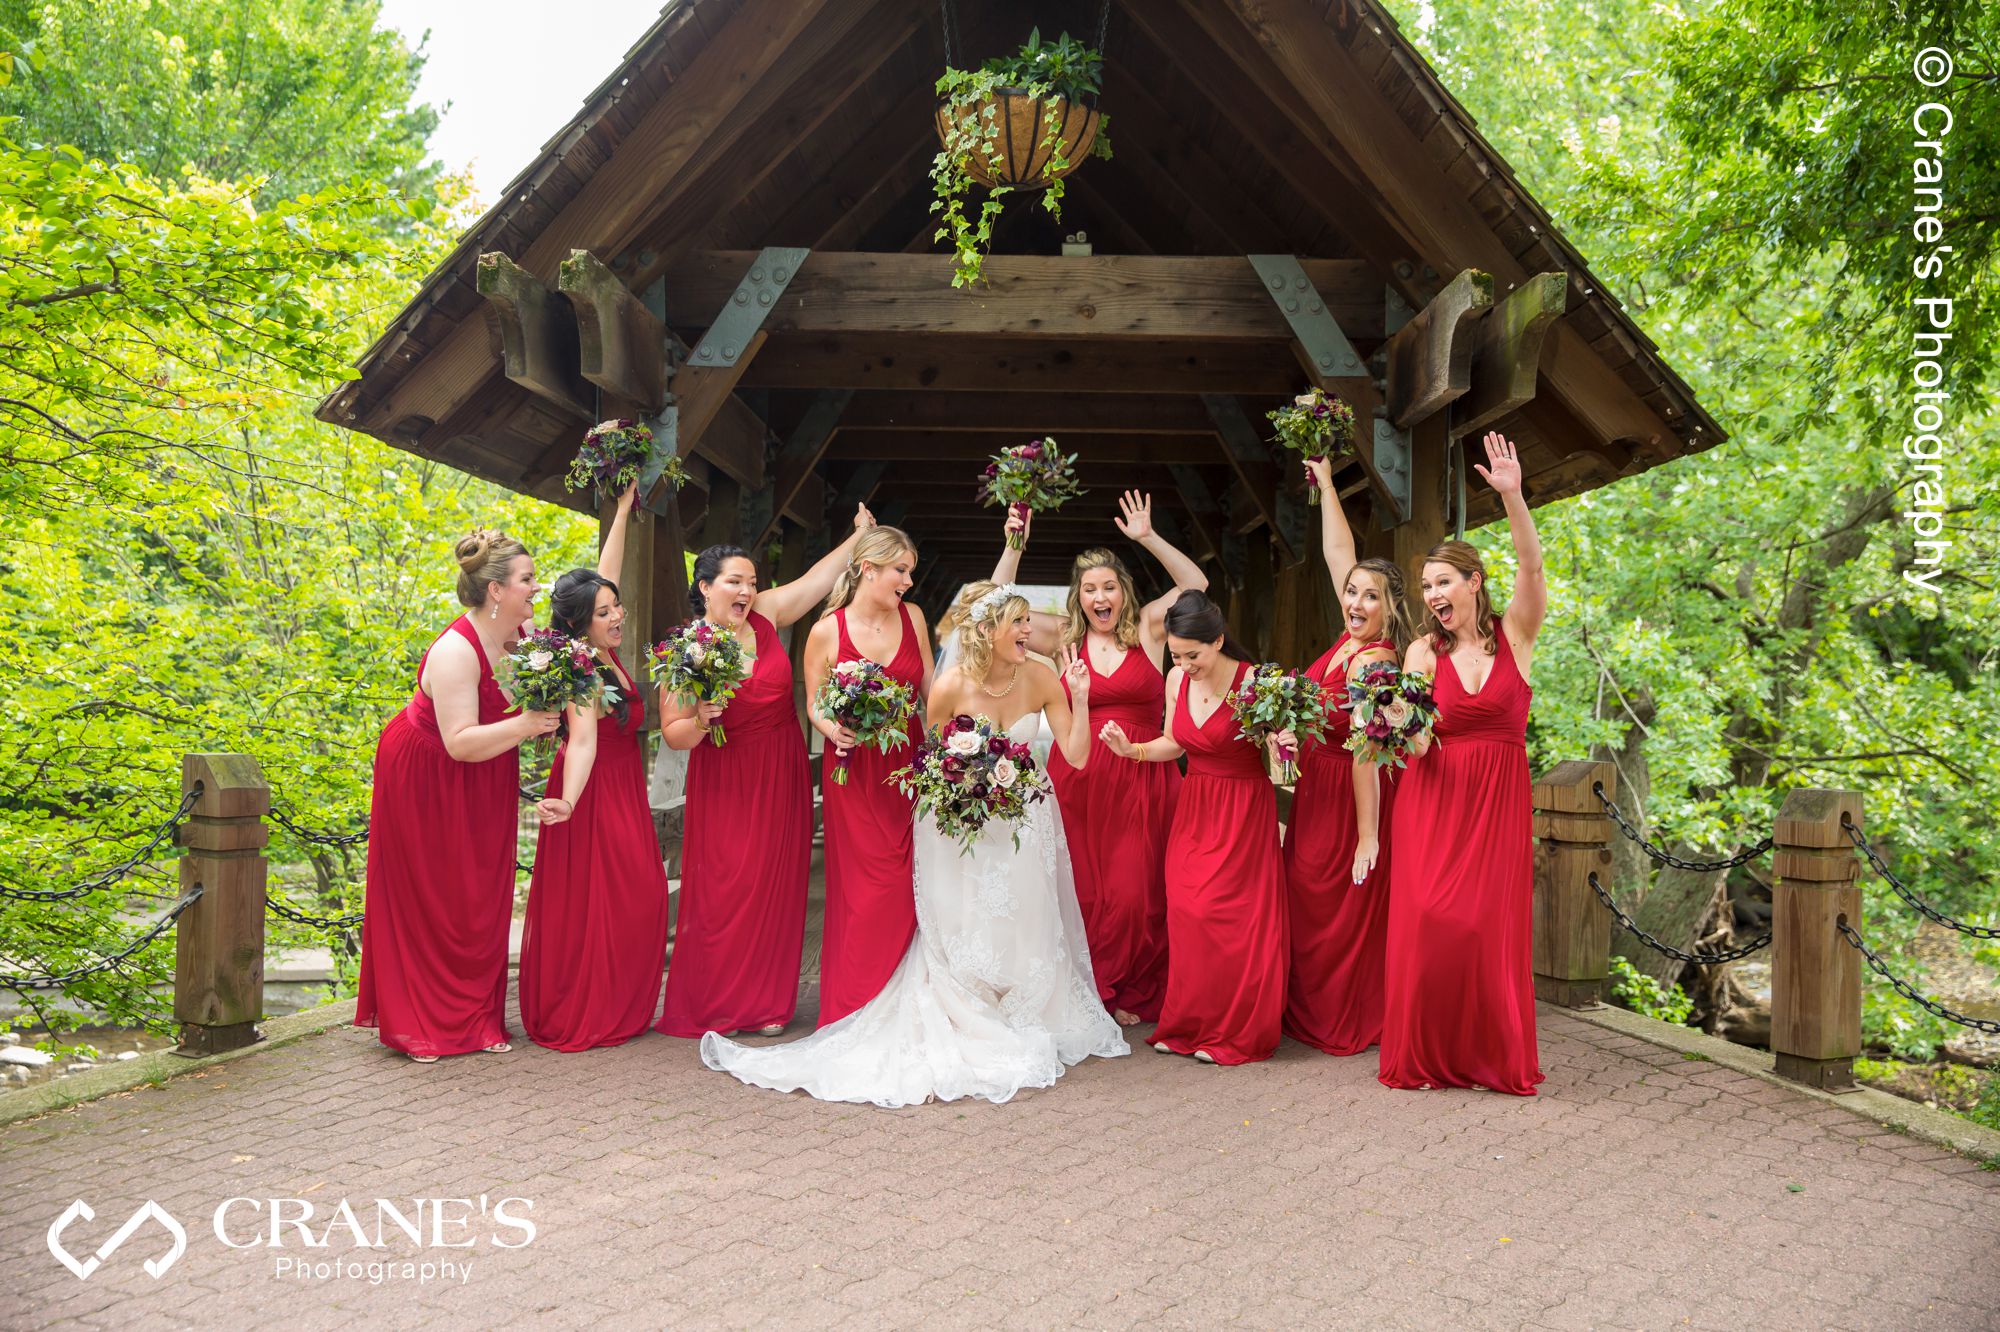 A candid bridal party wedding photo taken in front of the wooden bride at Naperville Riverwalk